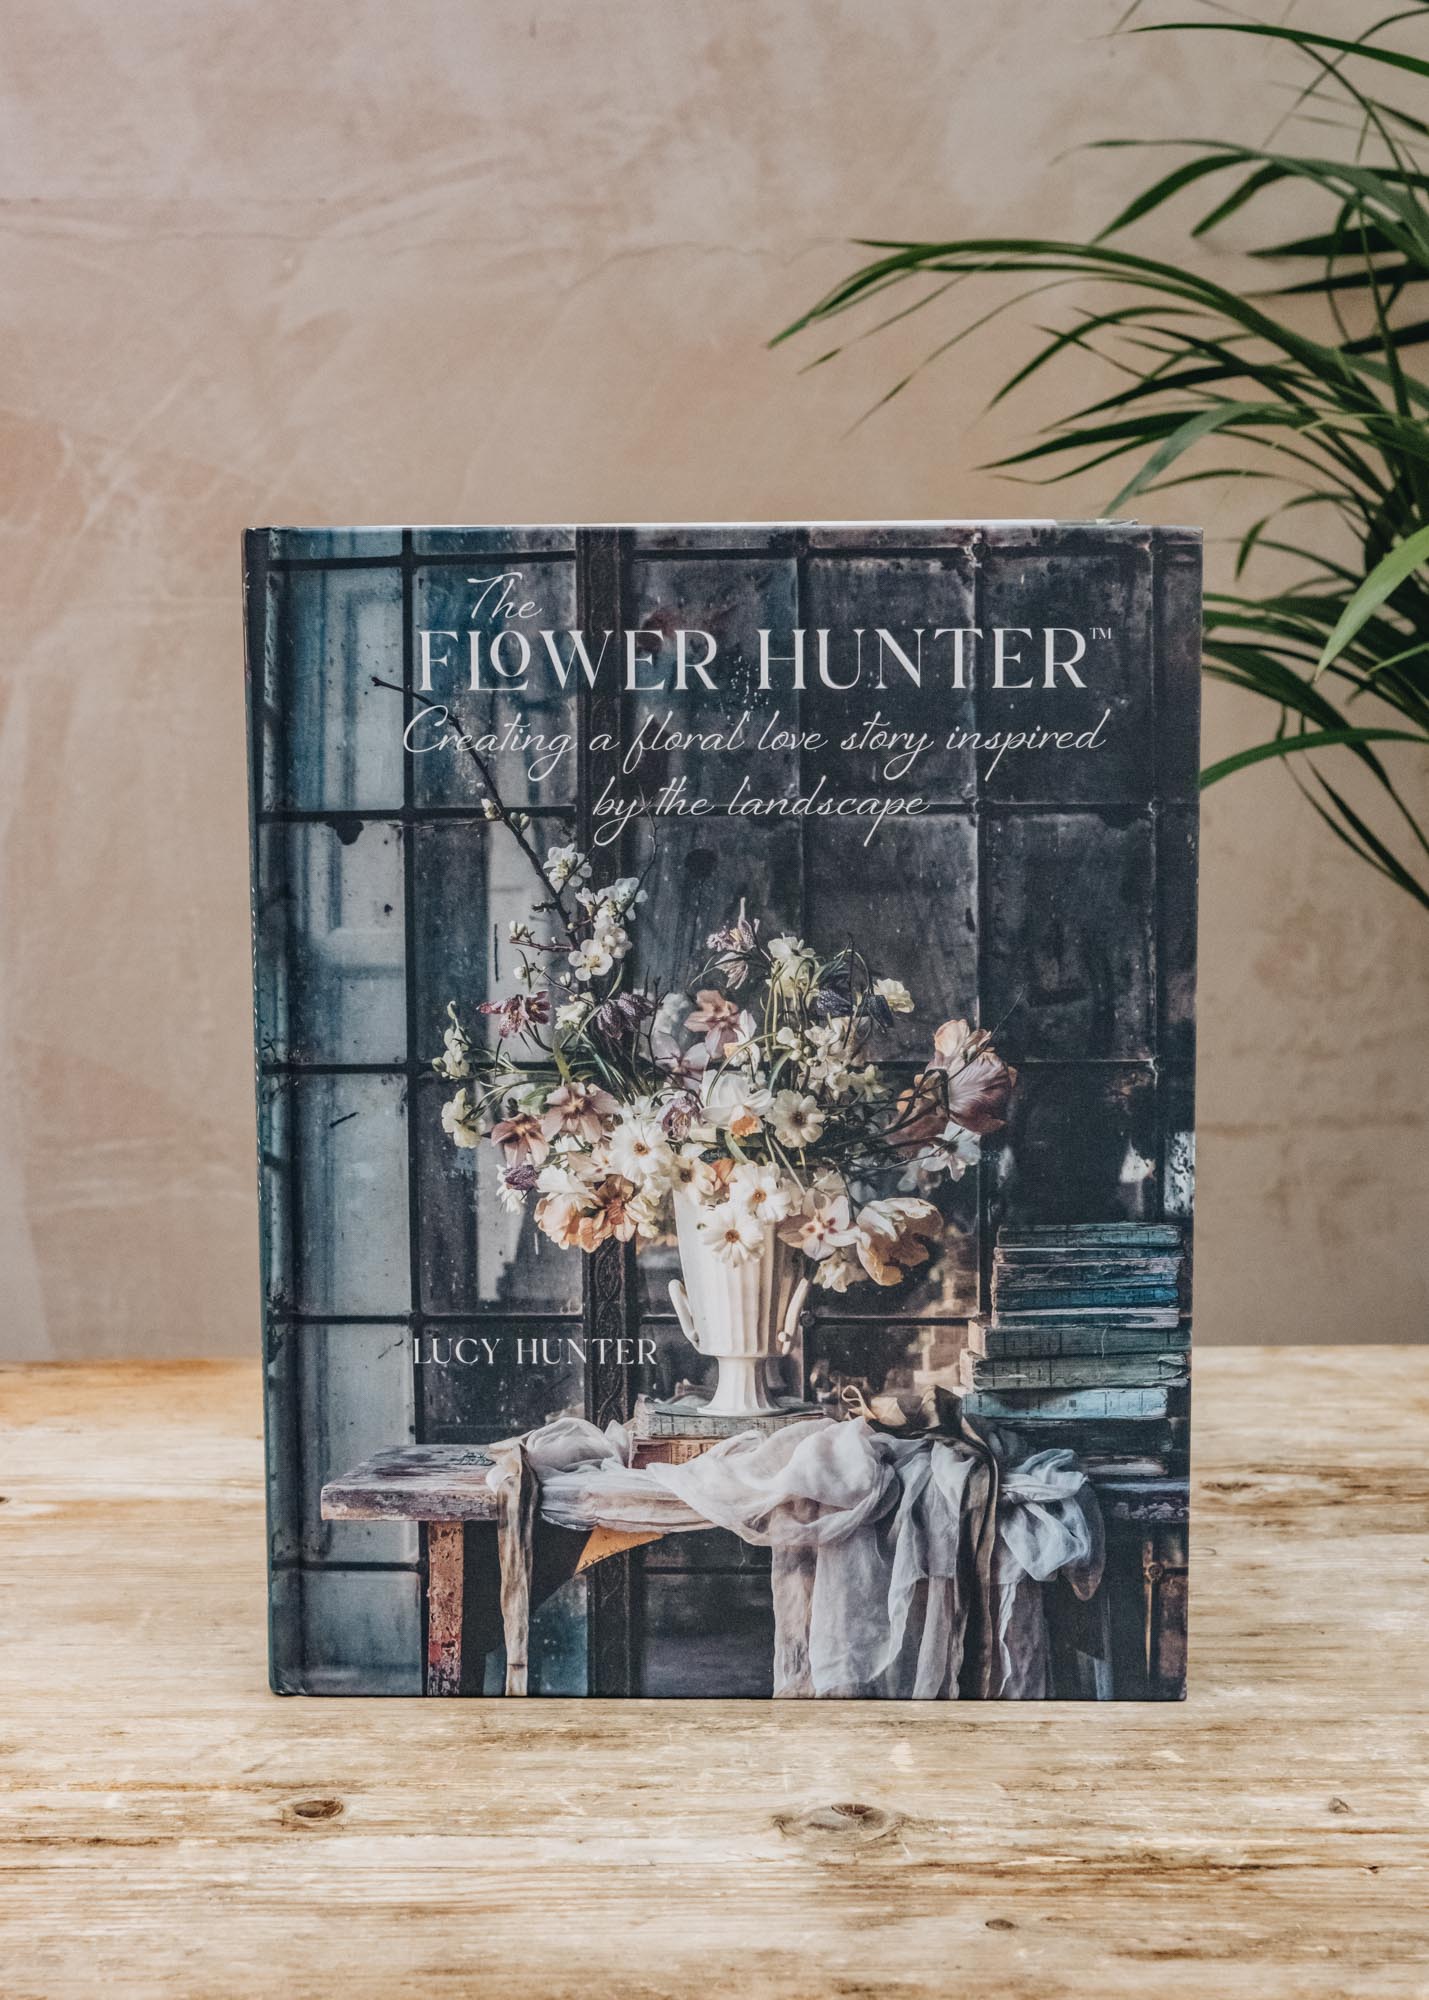 The Flower Hunter by Lucy Hunter